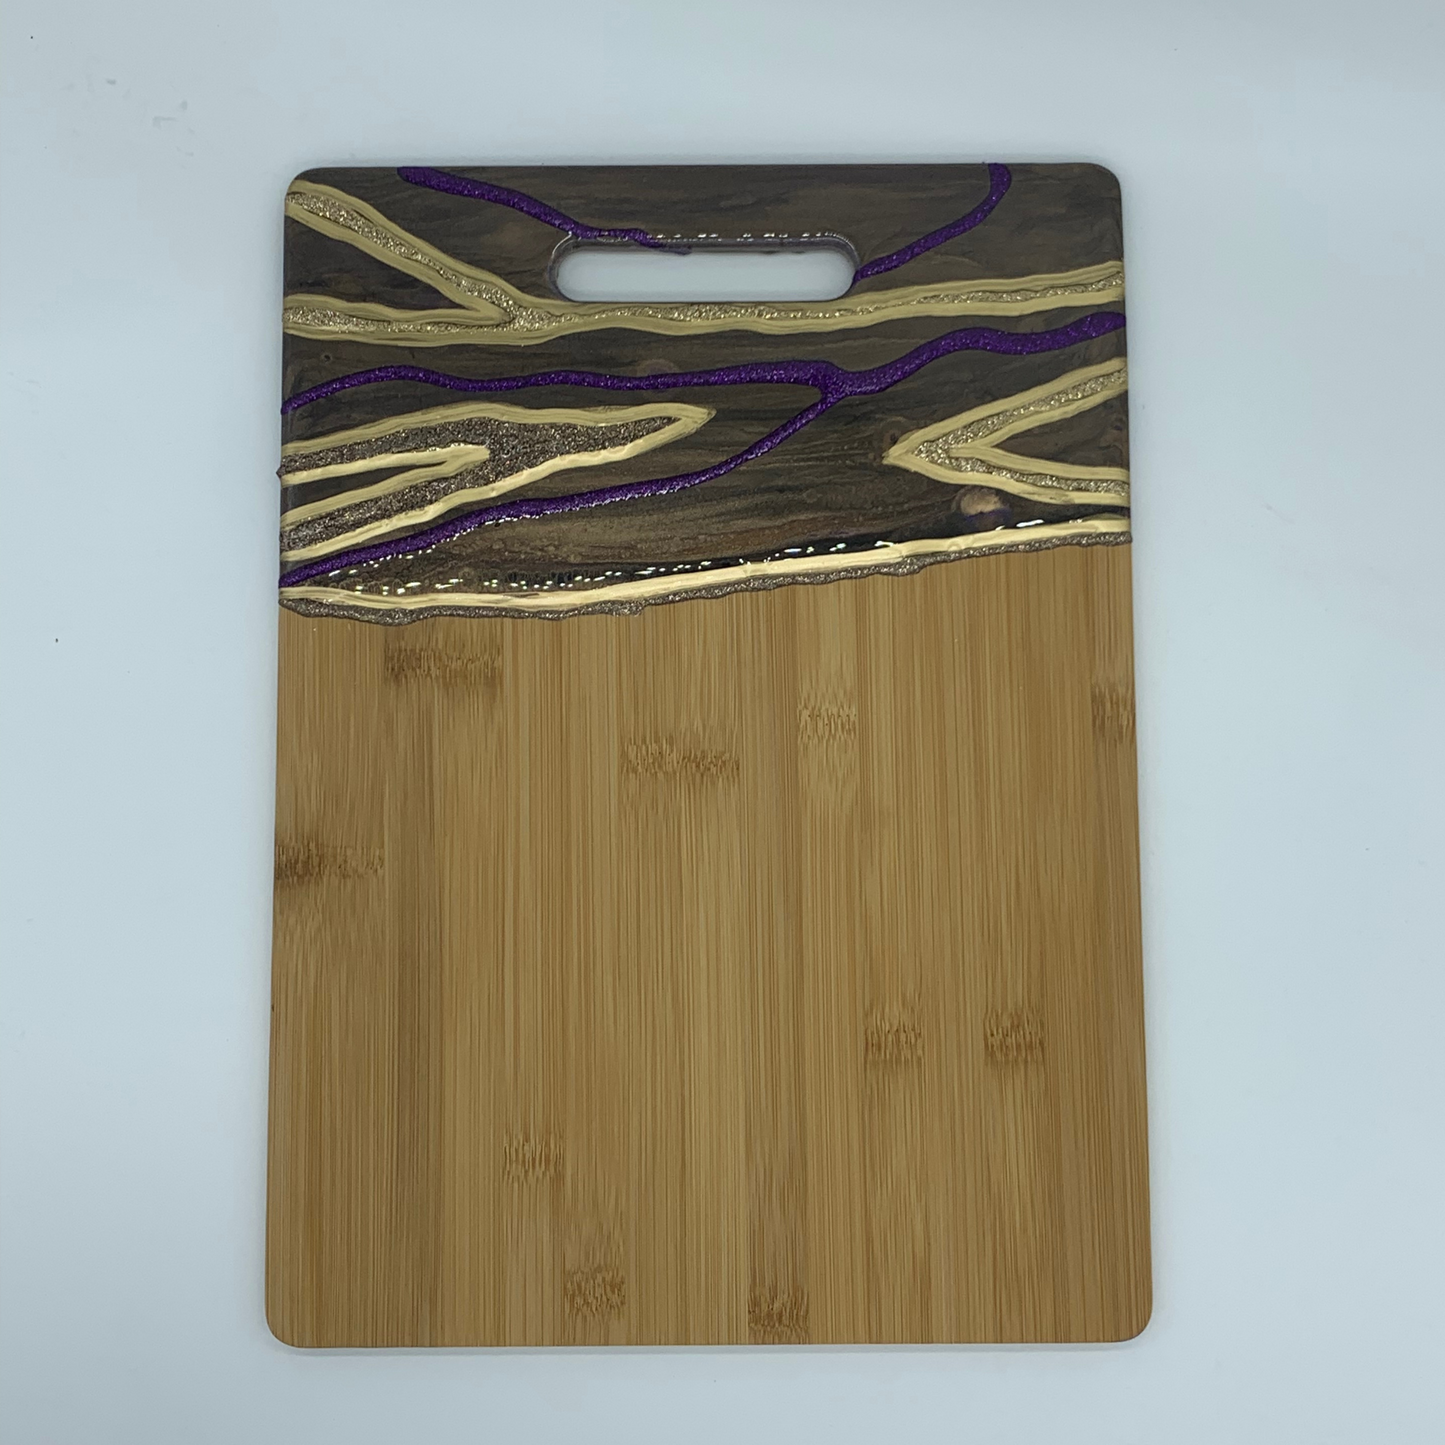 "Show Stopper" Gorgeous Functional Art Charcuterie Board/ Cutting Board